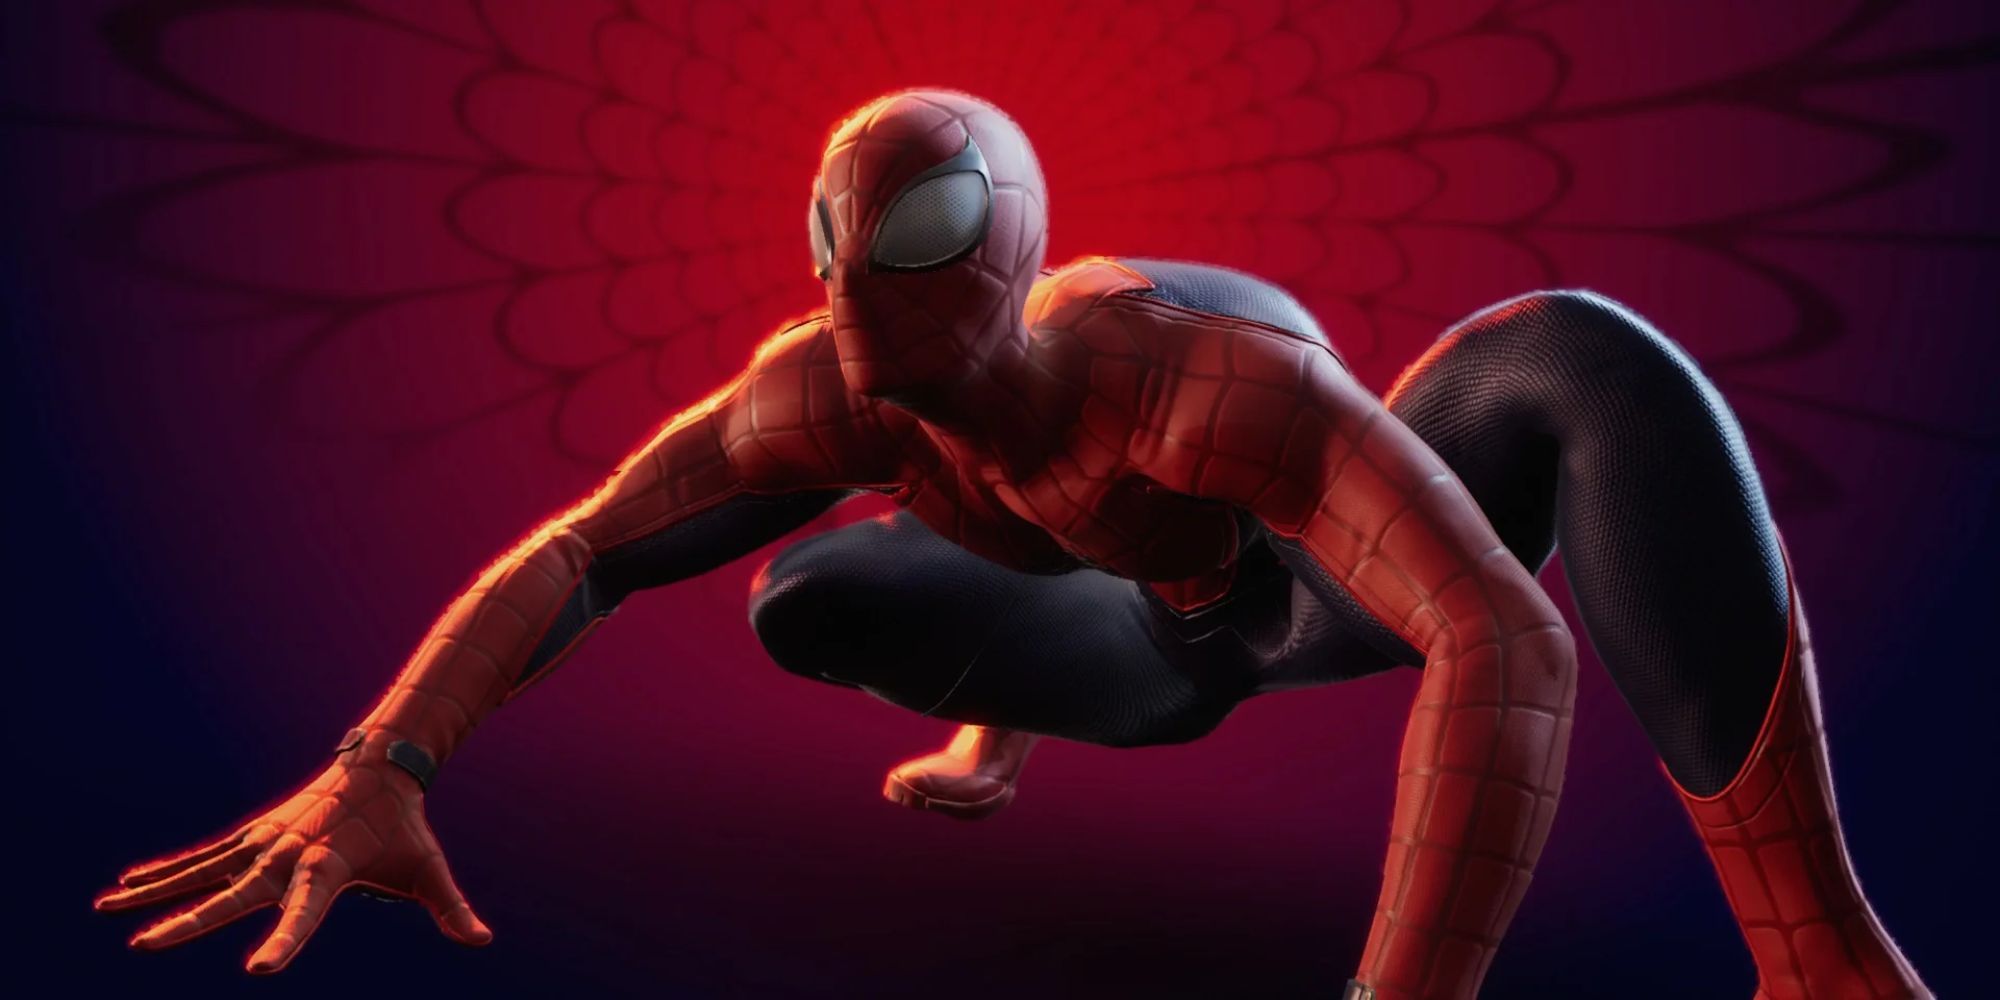 Spiderman uses his environment to inflict damage in Marvel's Midnight Suns